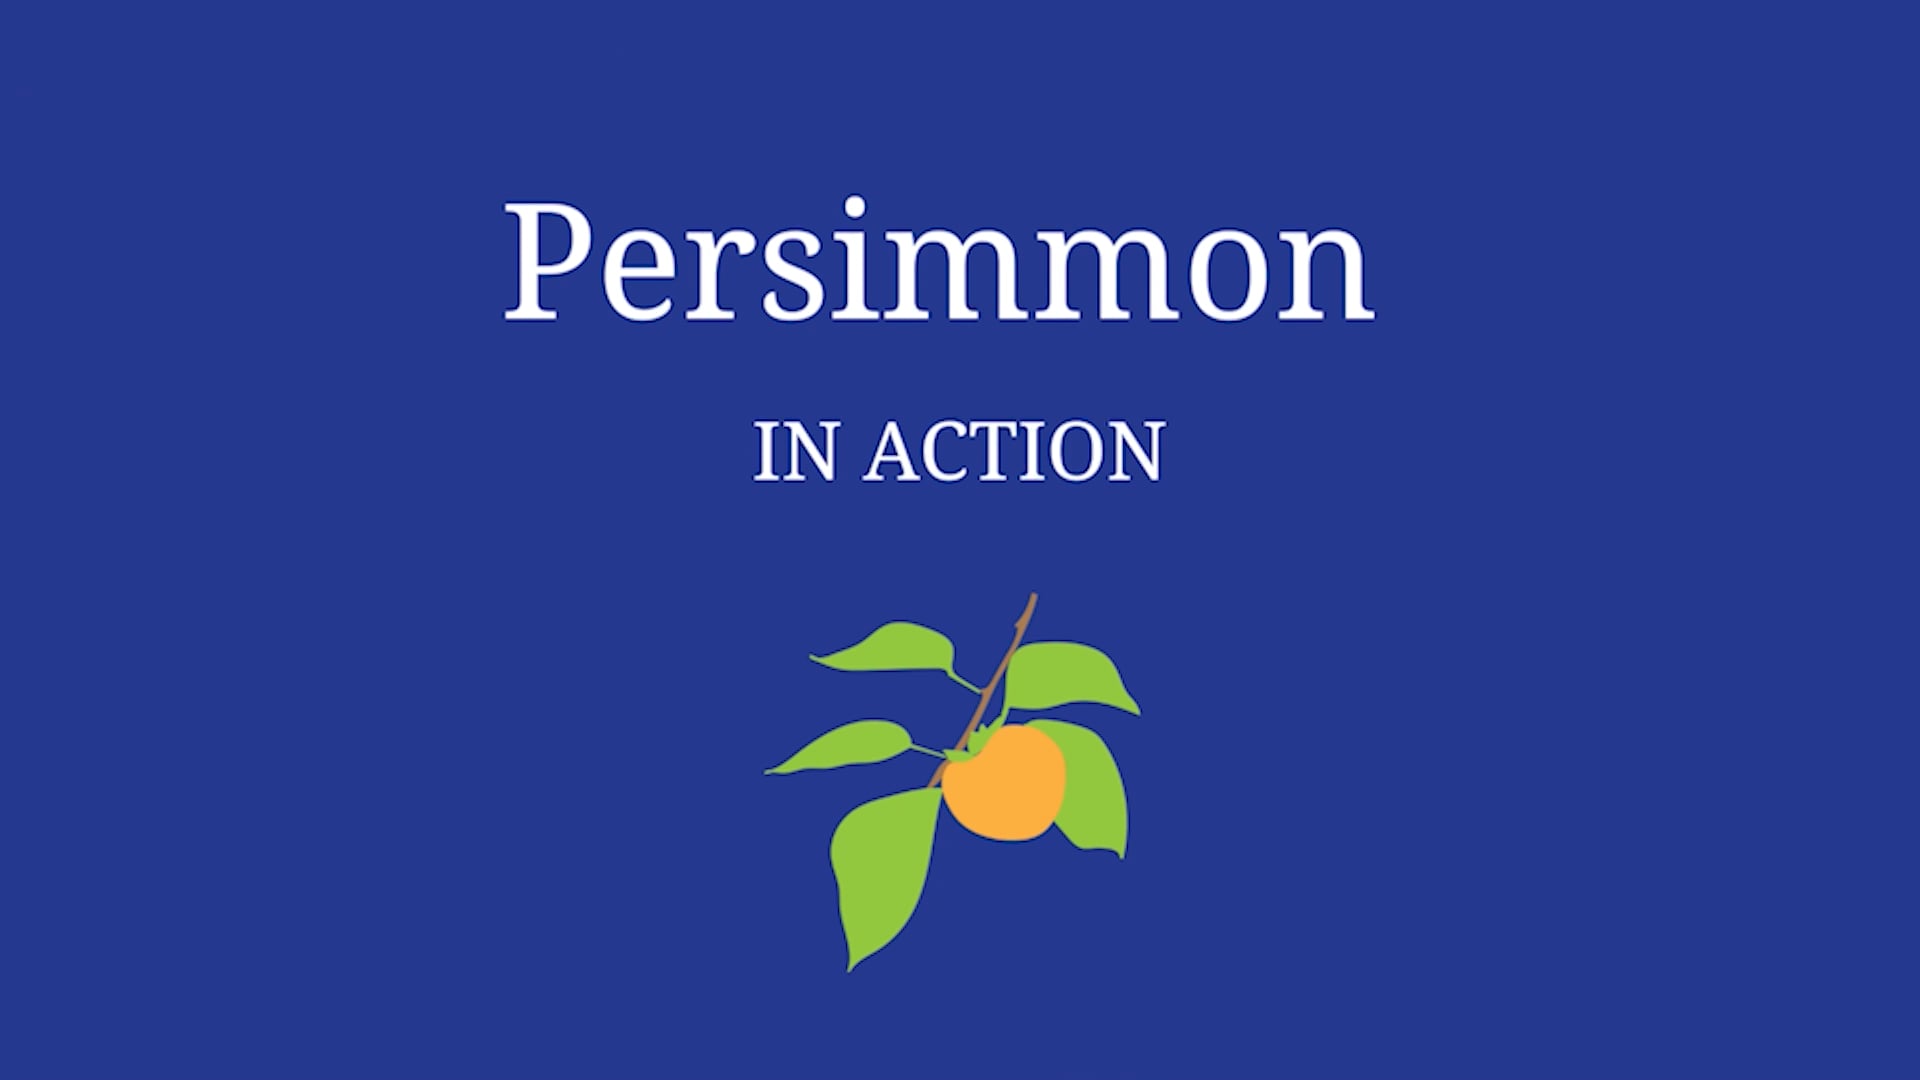 Persimmon in Action